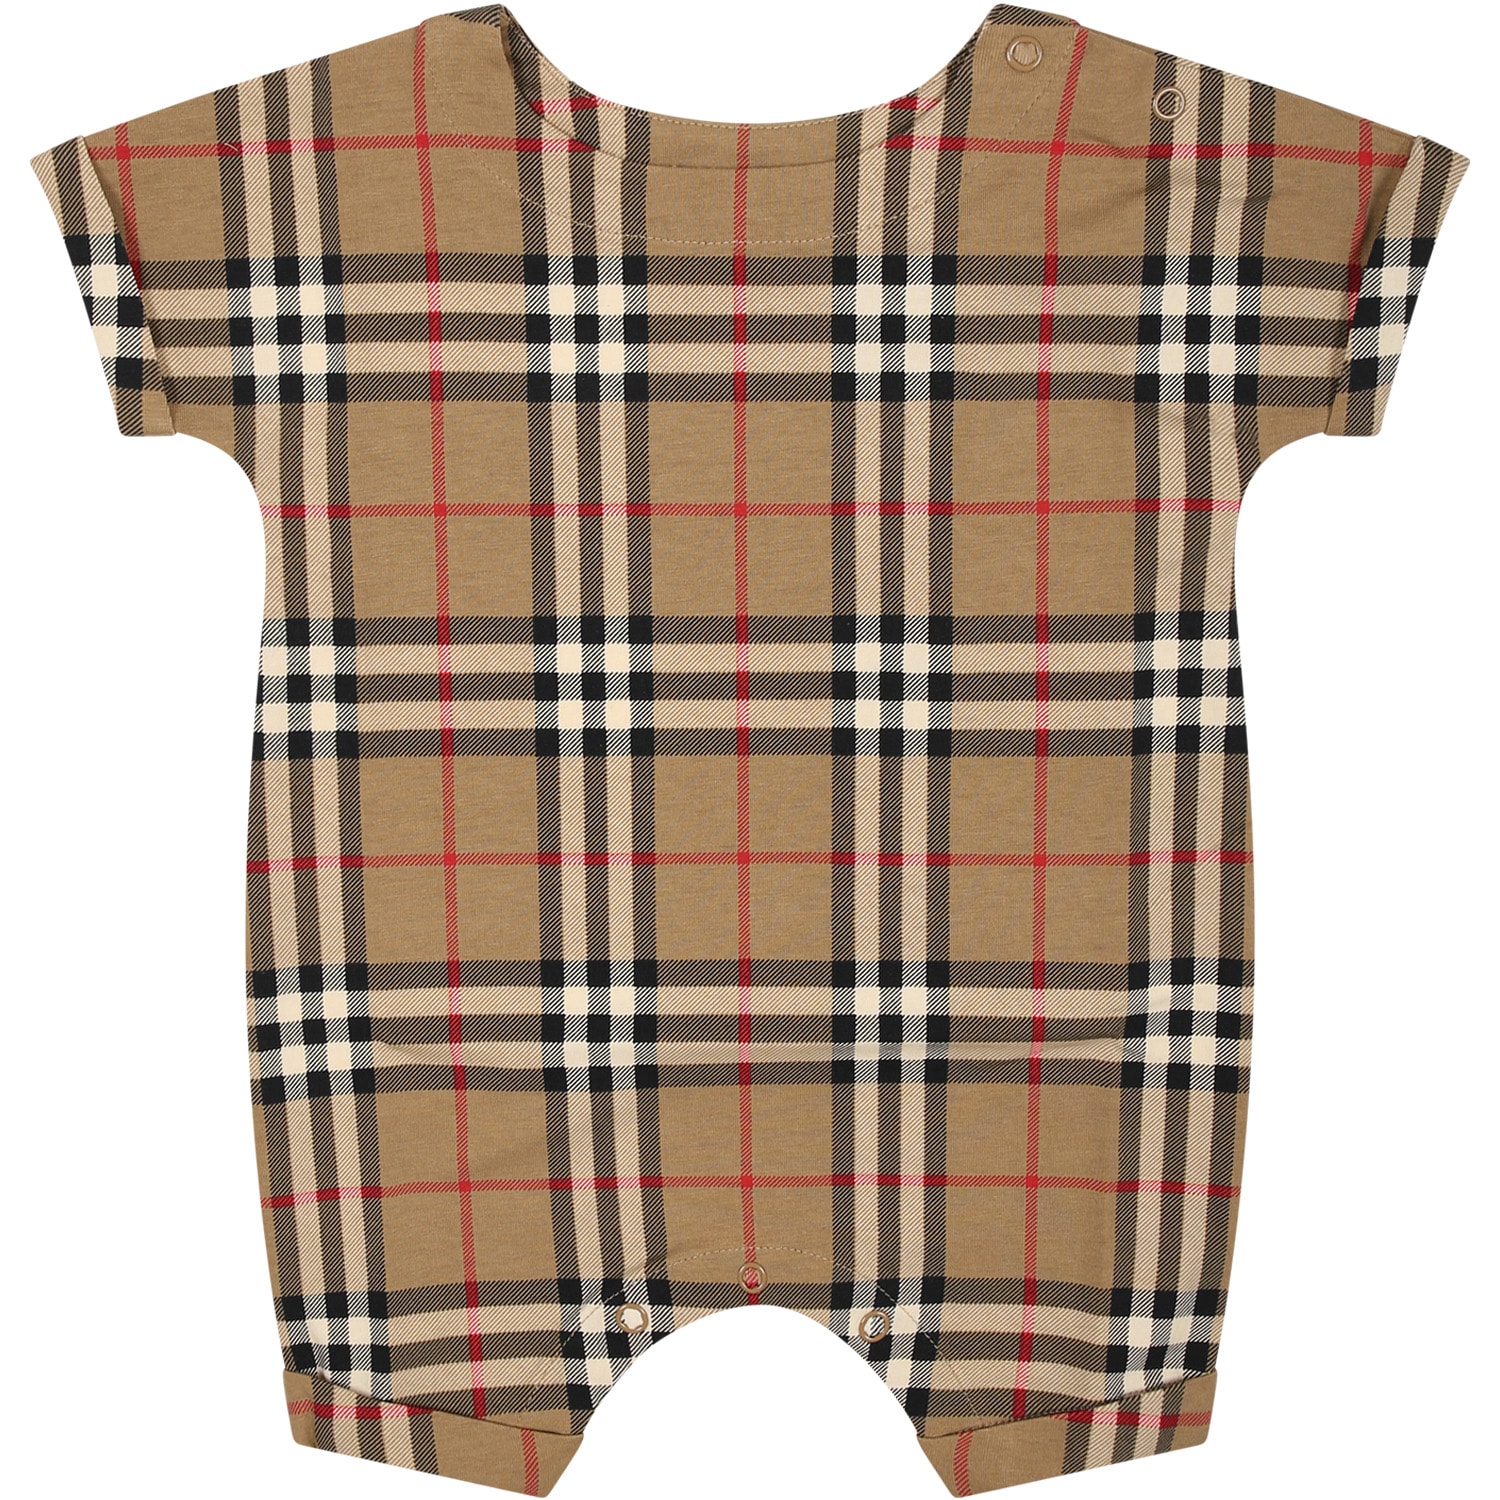 Burberry Beige Baby Bodysuit With Iconic All-over Vintage Check